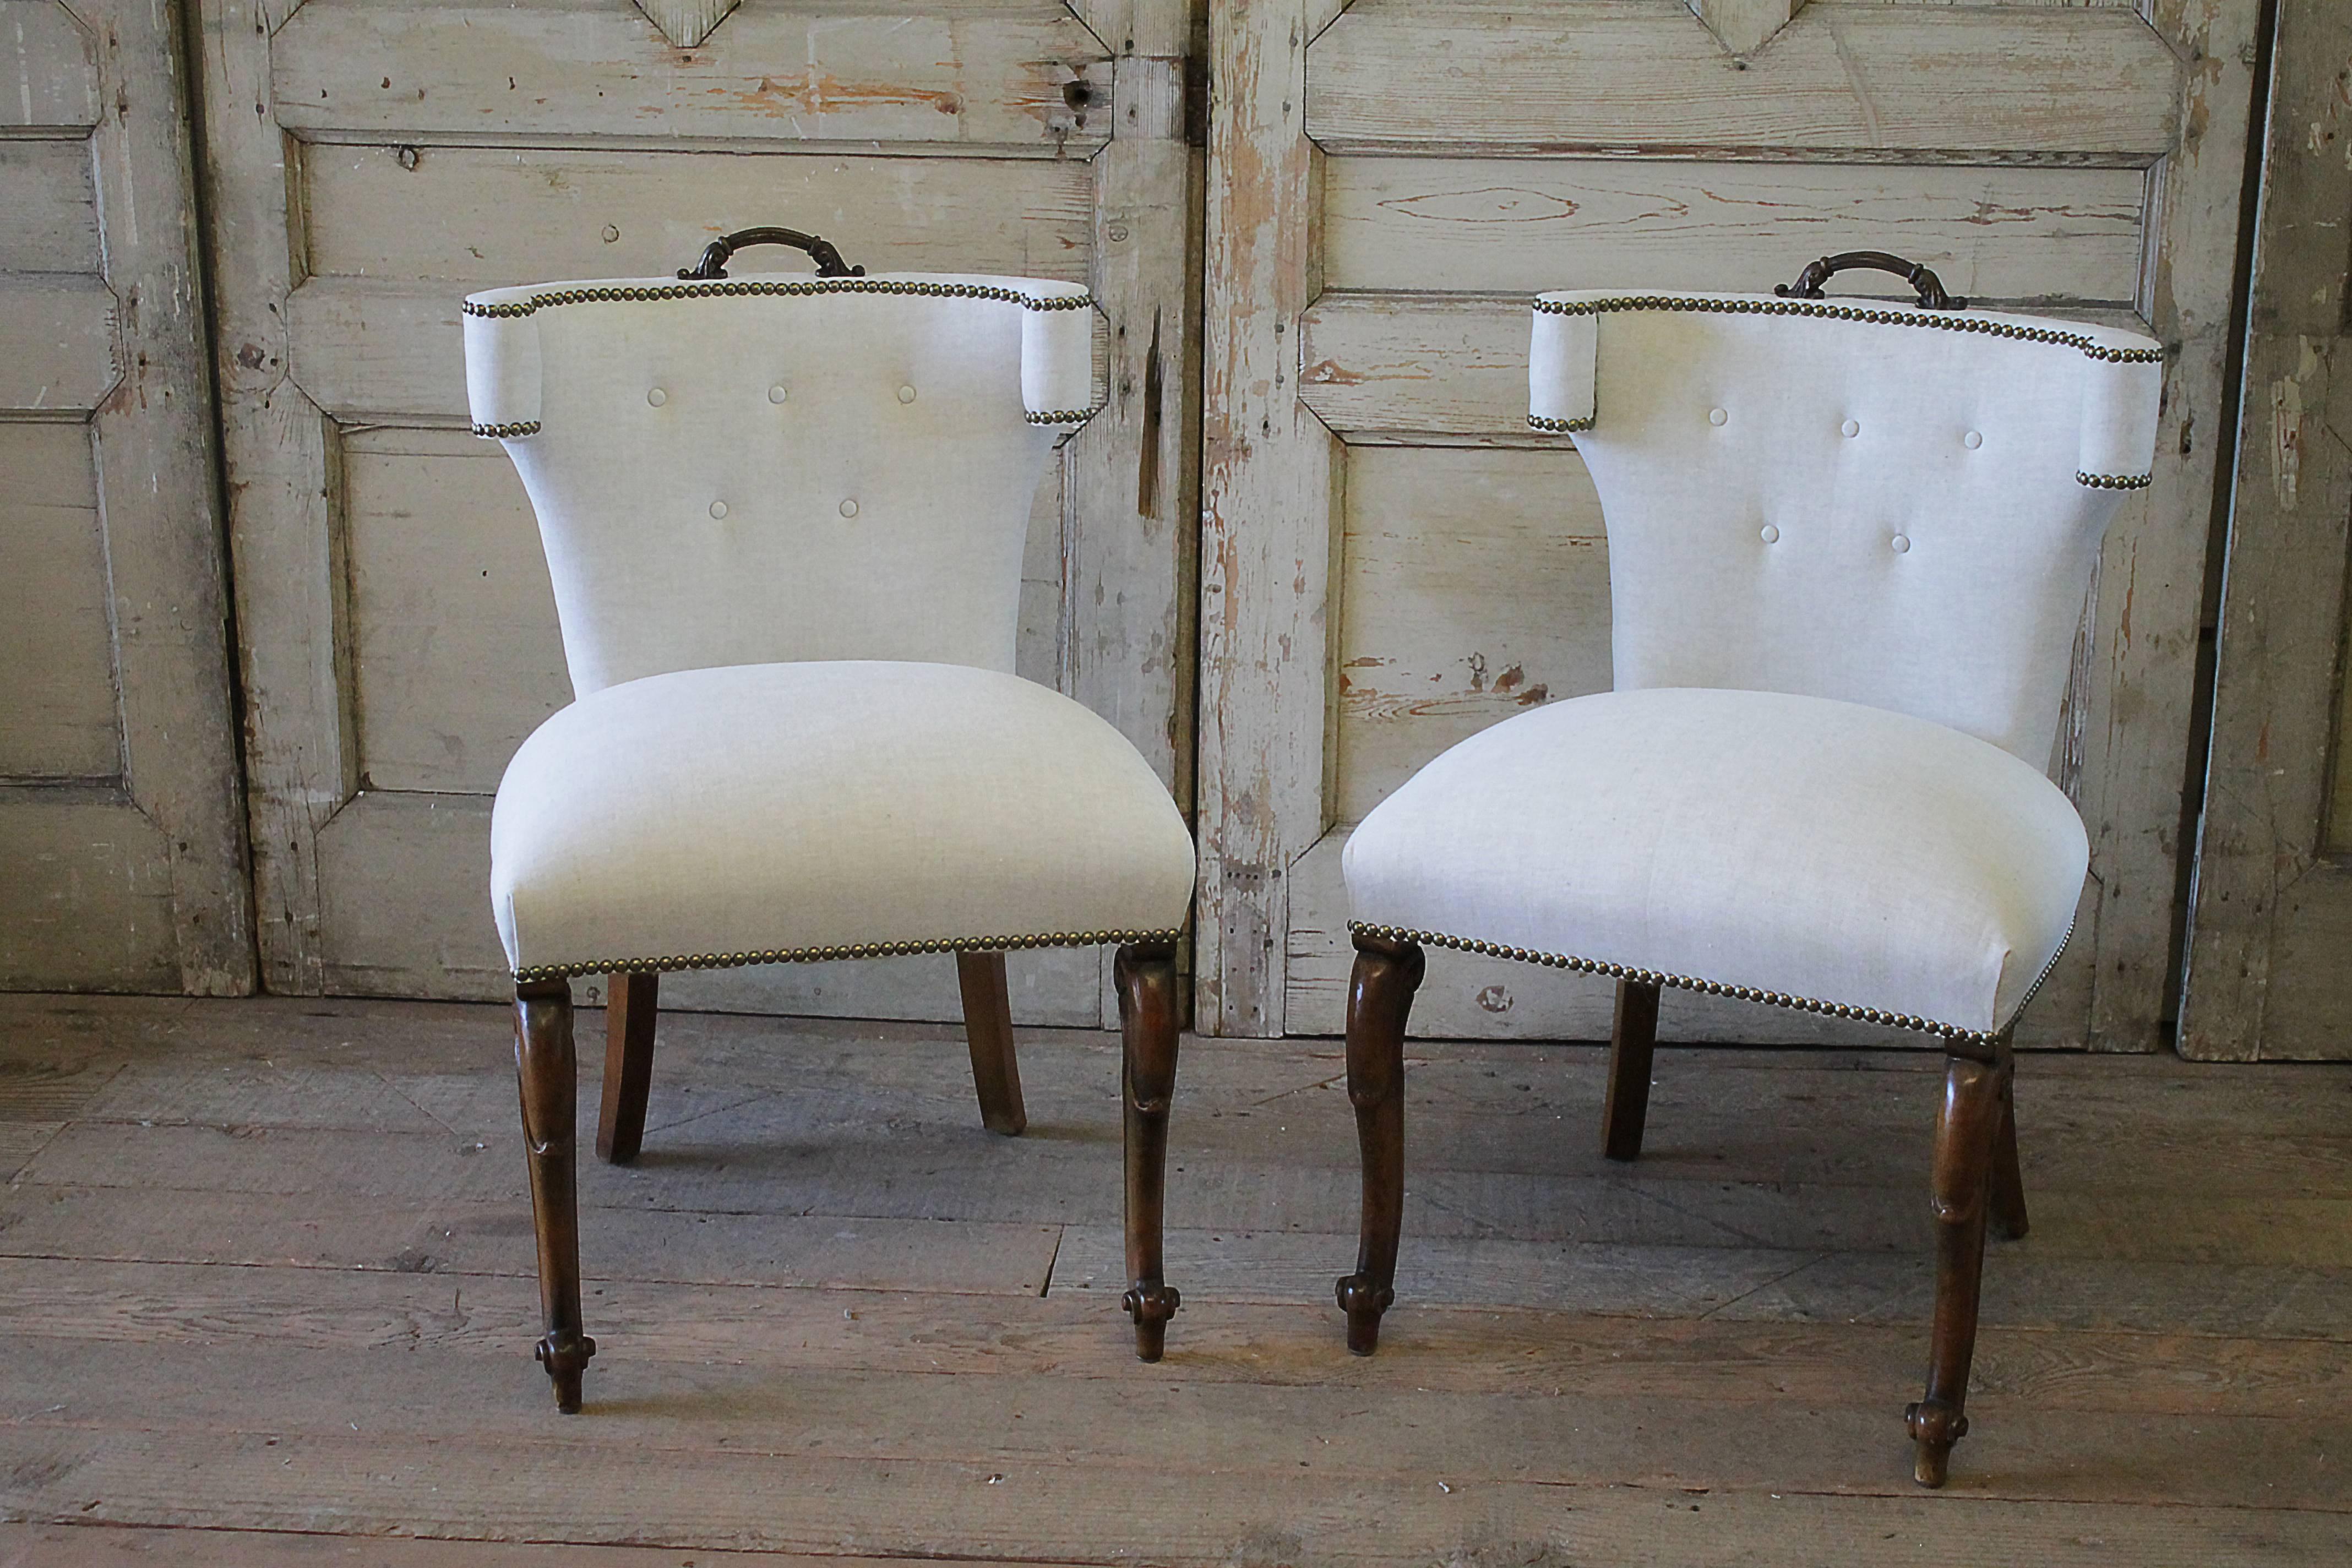 Fabulous set of four upholstered linen dining chairs from the early 20th century. These chairs came to us with an old cracked burgundy leather, and we have reupholstered them in a natural Belgian linen, and kept the original patina pulls atop the